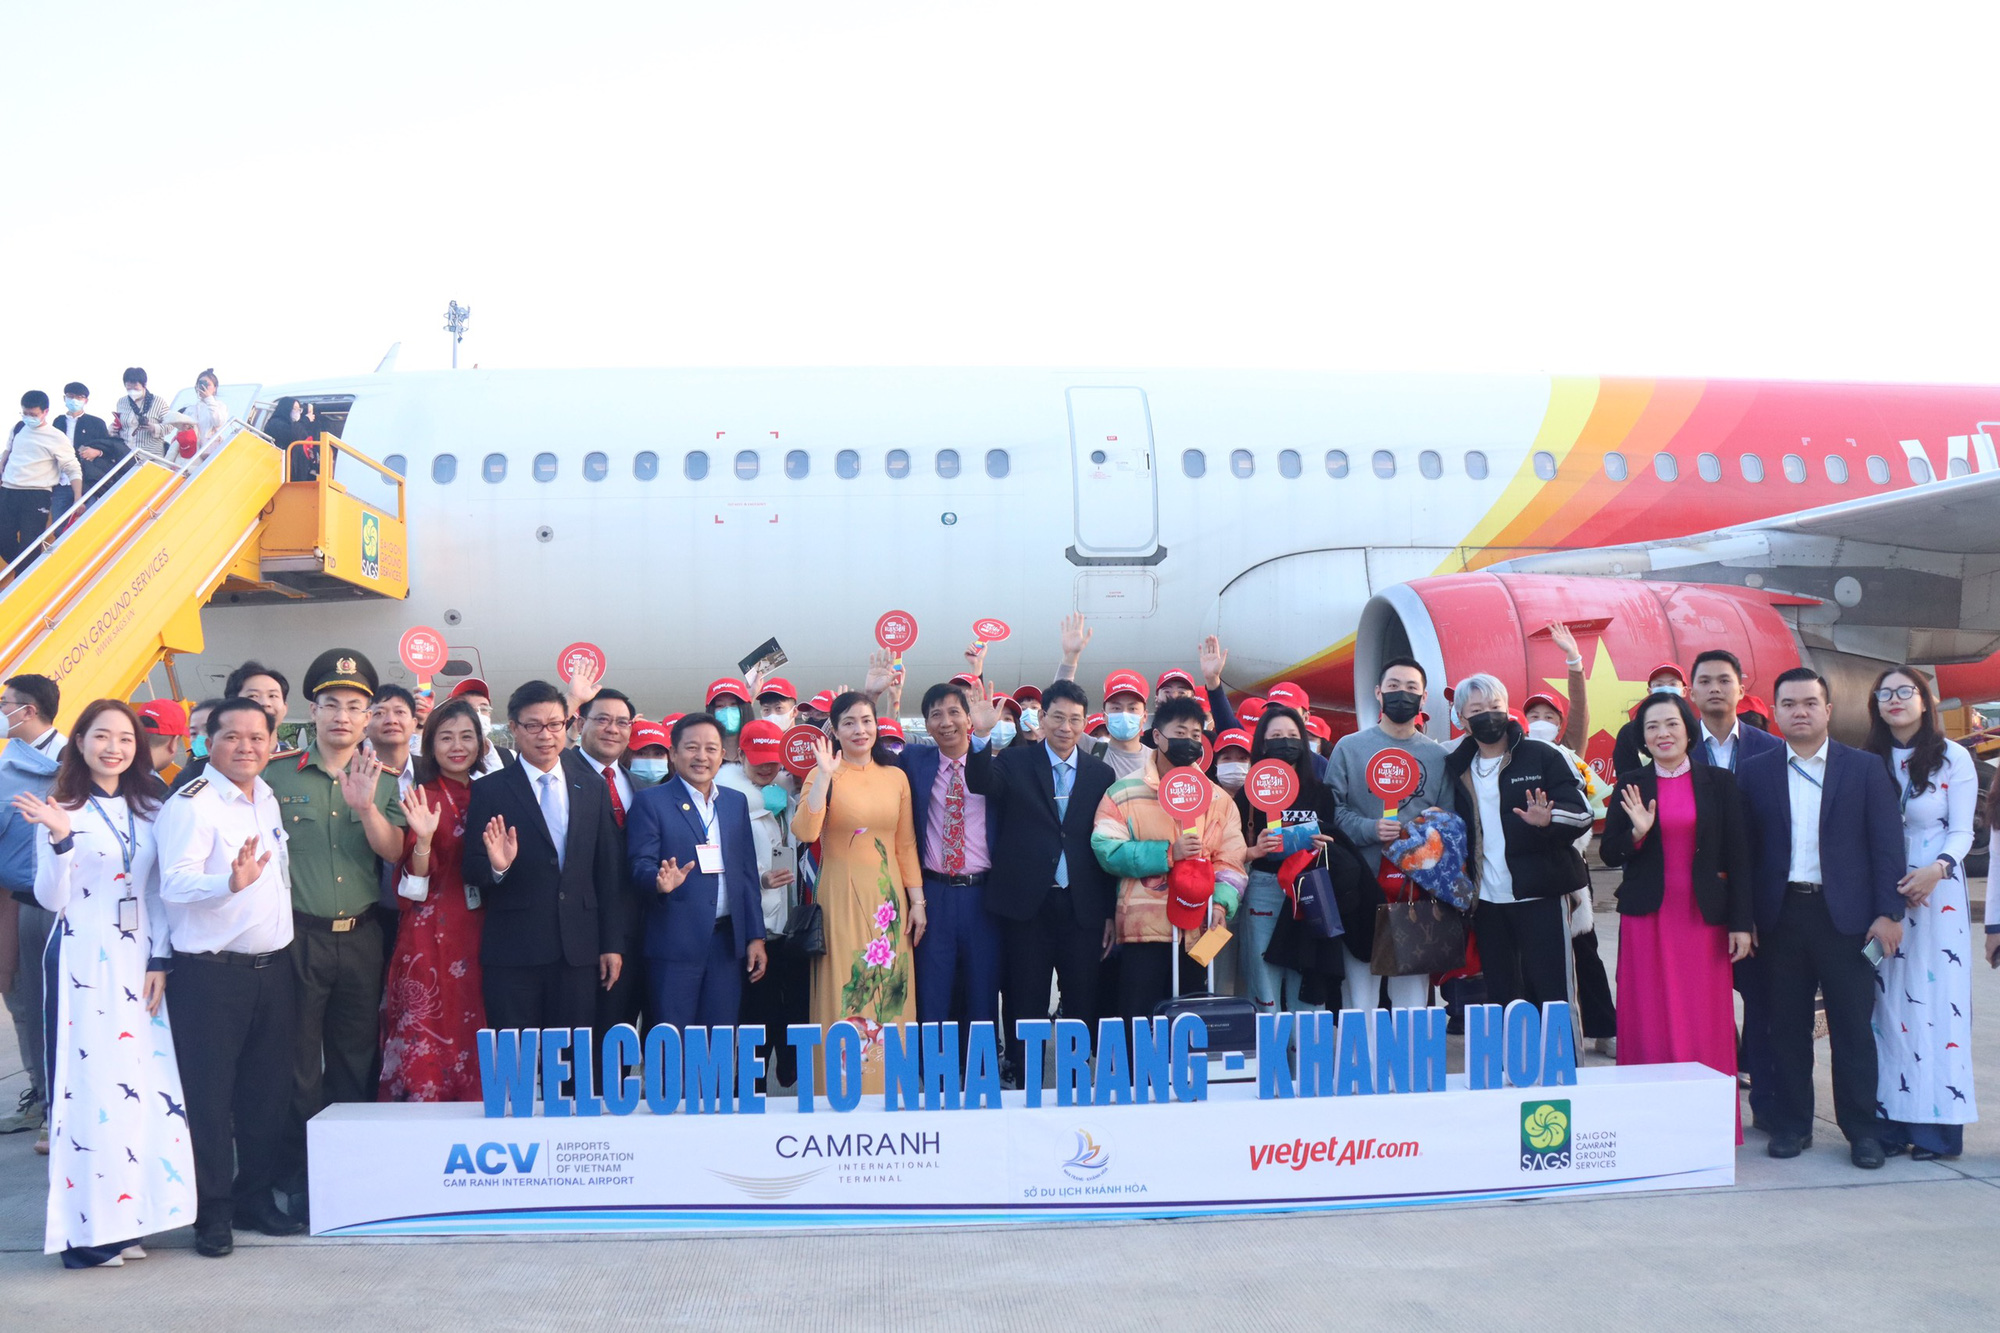 Vietnamese tourism firms, airlines show mixed reactions over Vietnam’s absence from China’s outbound destination list